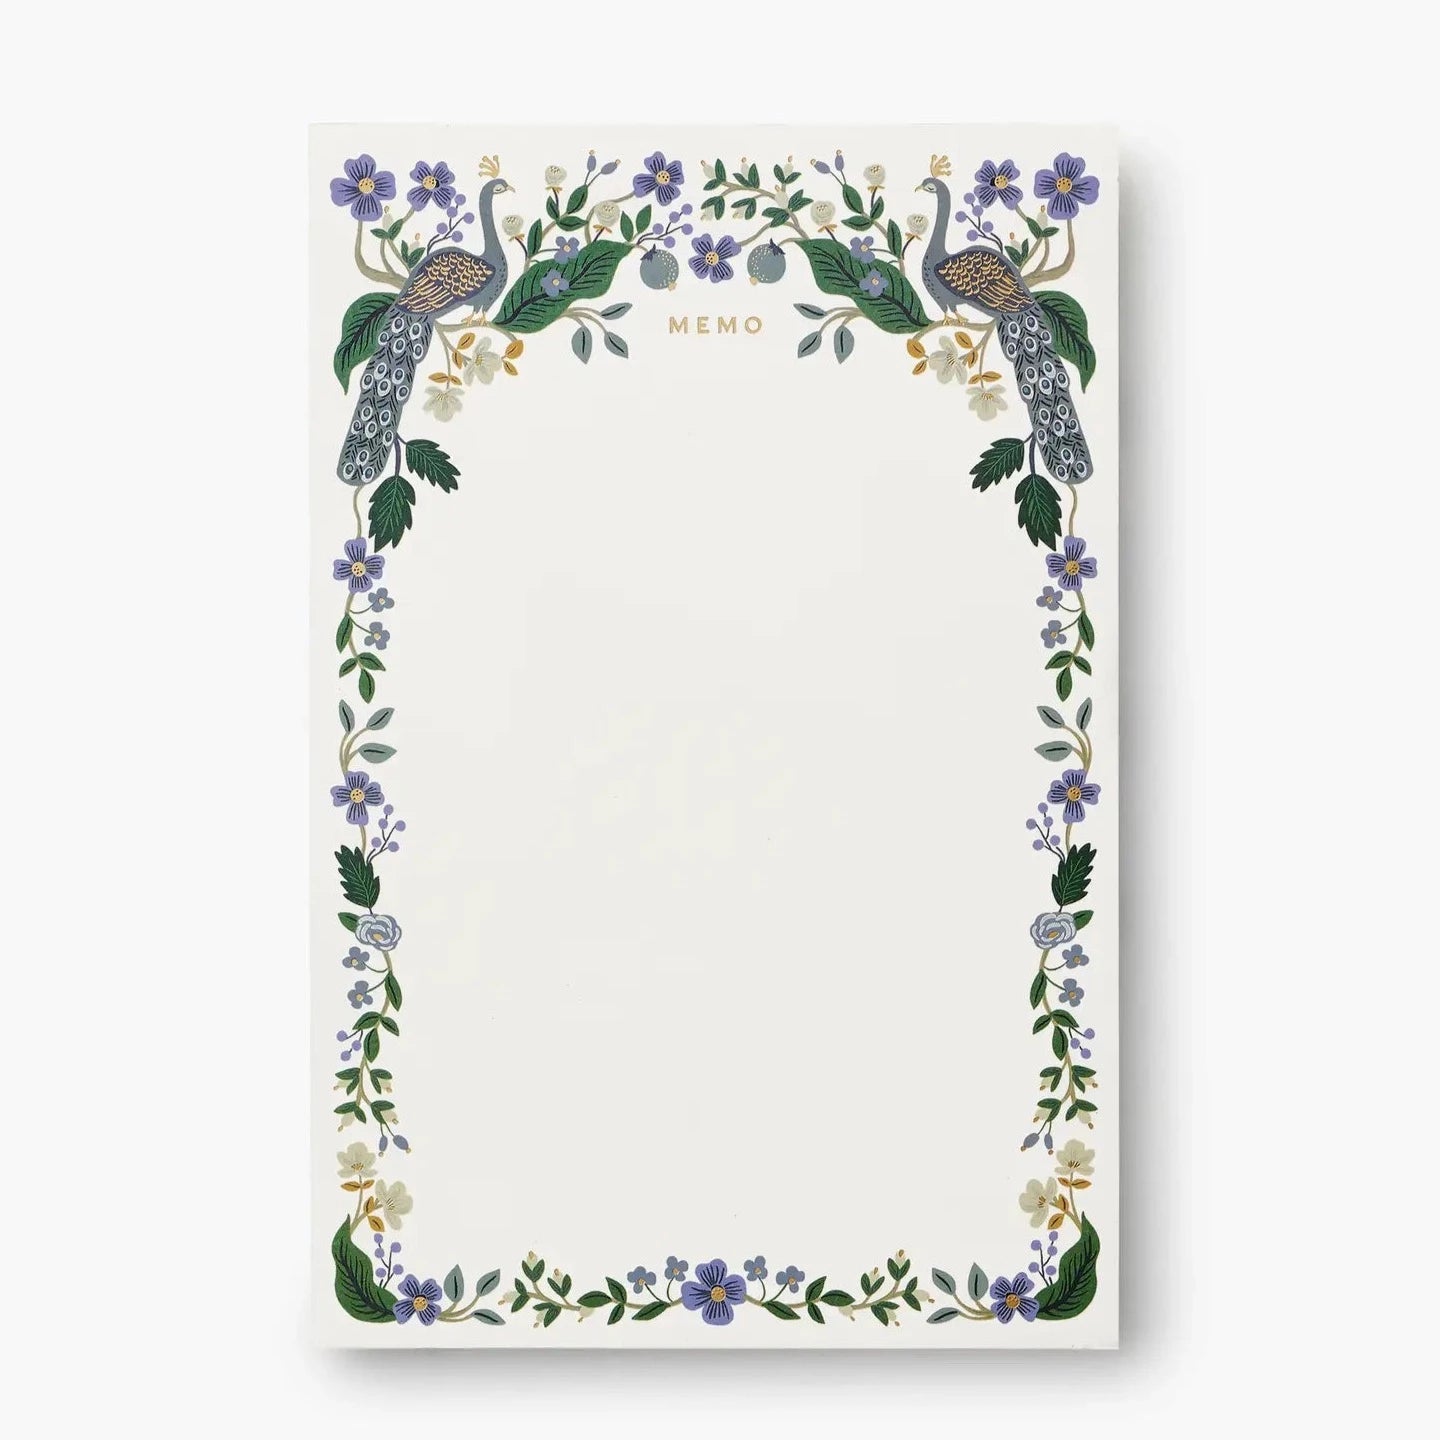 white memo pad with the word "memo" printed in gold foil at the top. Around the borders of the page are blue peacocks and blue flowers with greenery